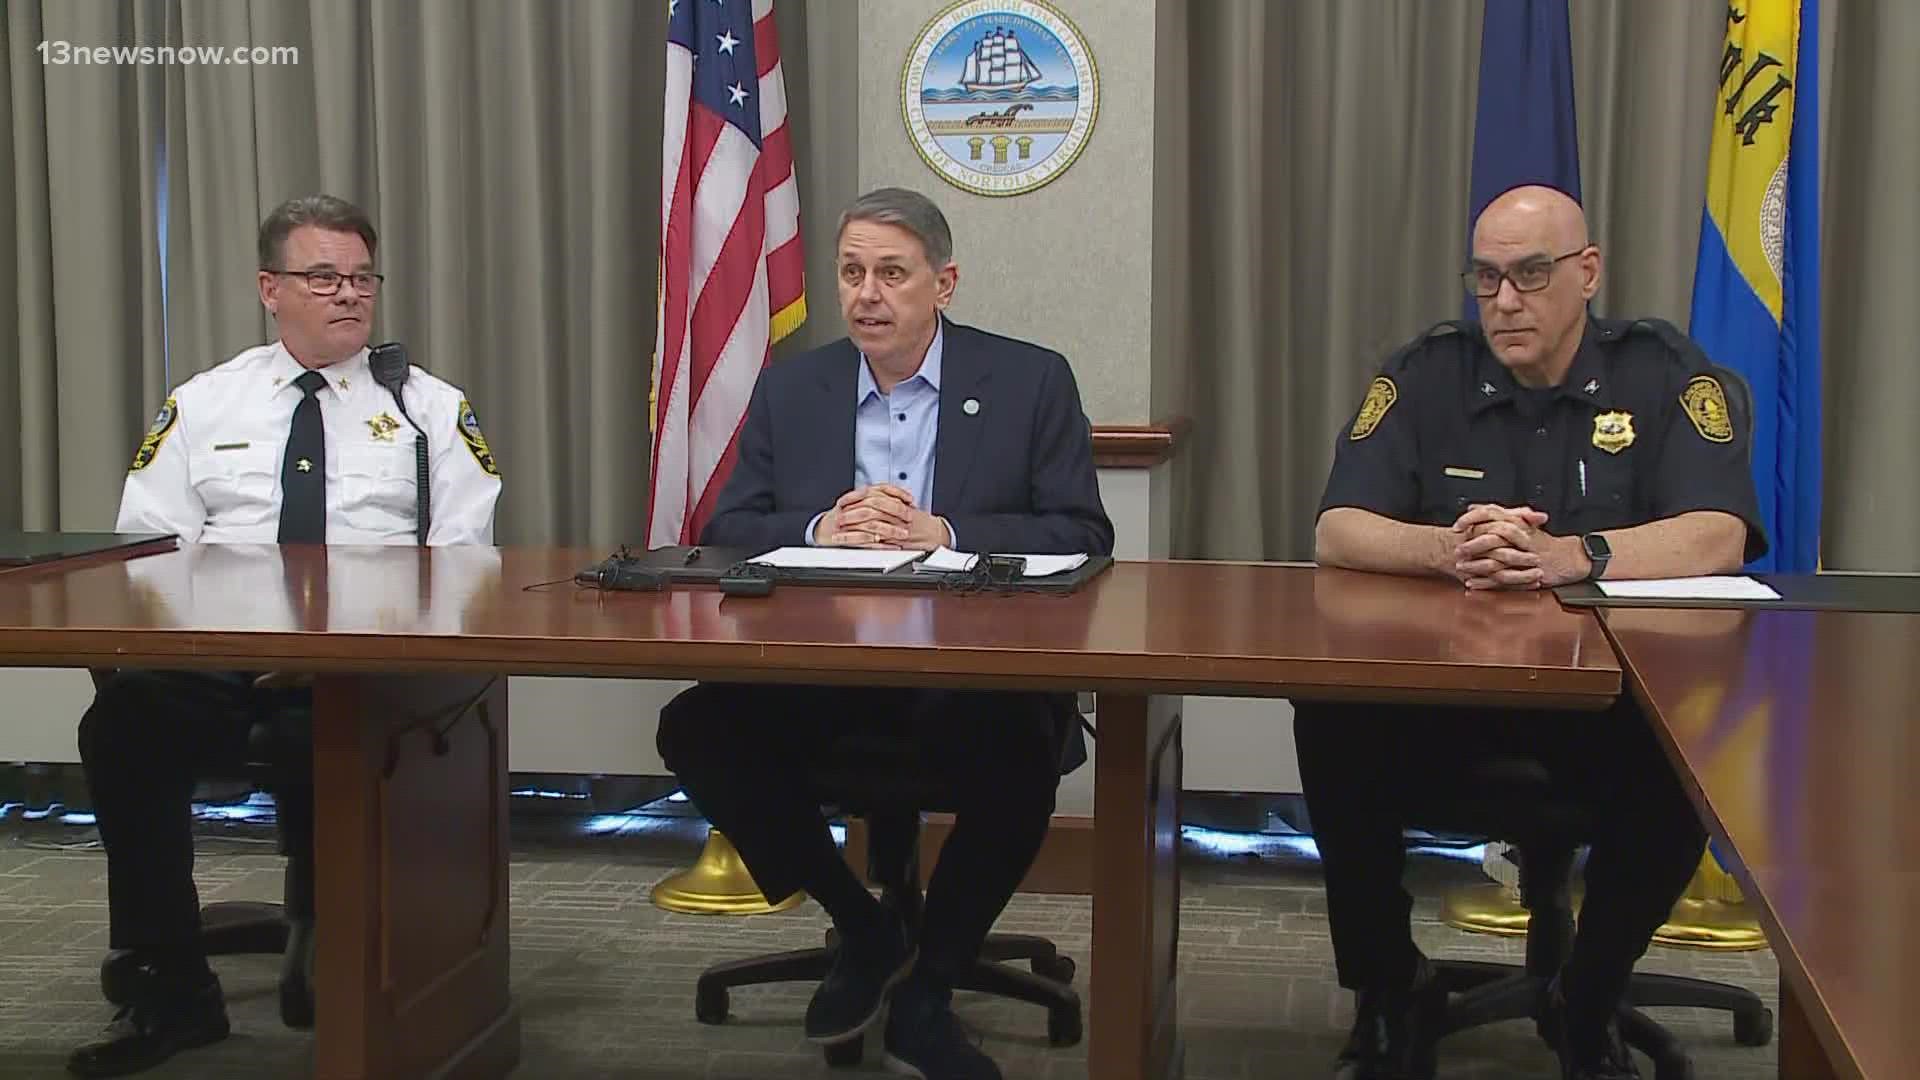 Norfolk City Manager Chip Filer, Interim Police Chief, Michael Goldsmith, and Sheriff Joe Baron give an update on an early-morning shooting that left 4 people hurt.